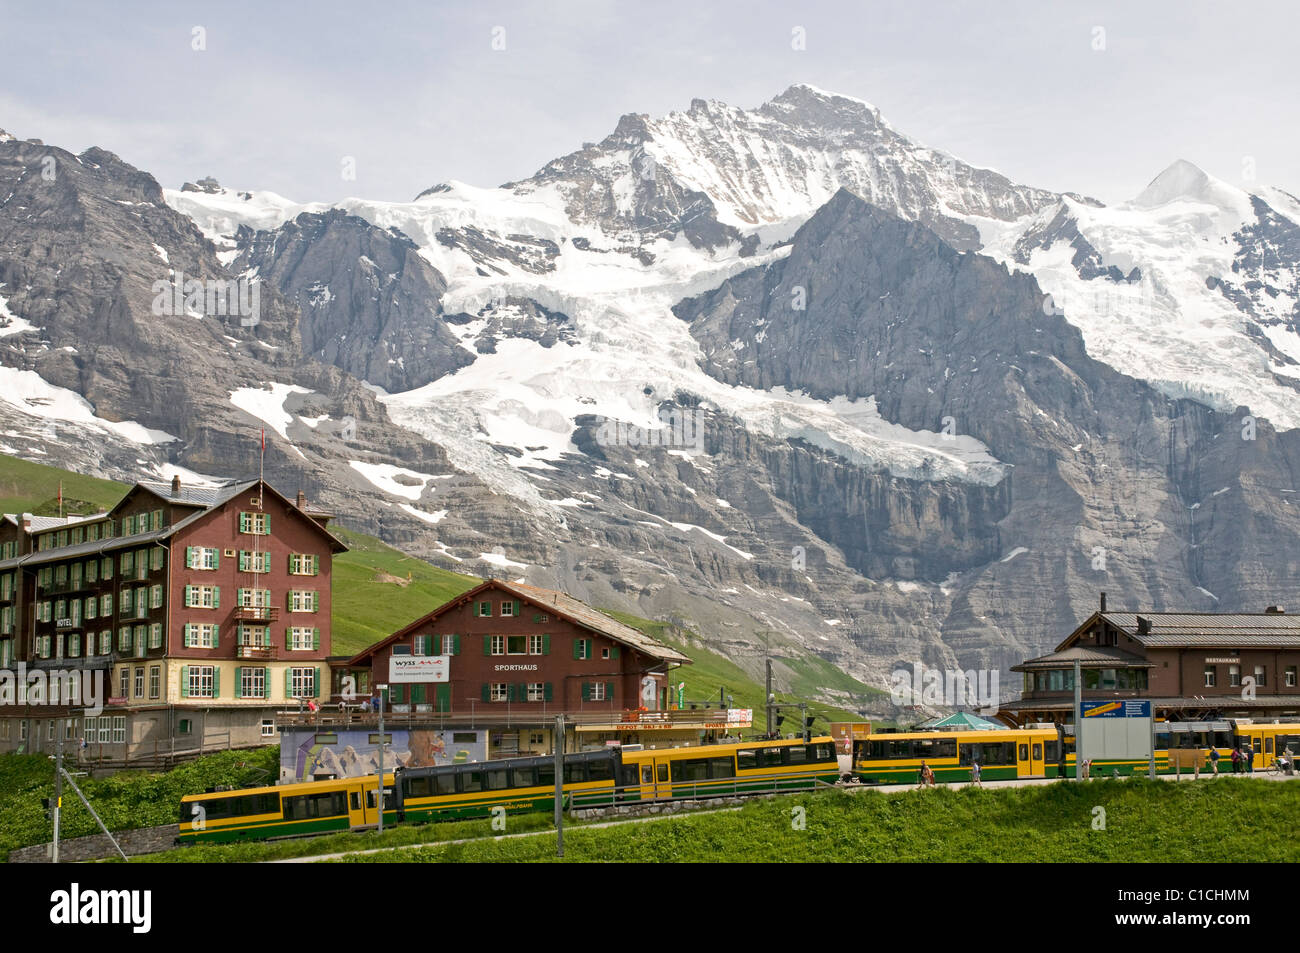 Scene at Kleine Scheidegg in the Swiss Alps, with the Jungfrau and Silberhorn peaks behind Stock Photo